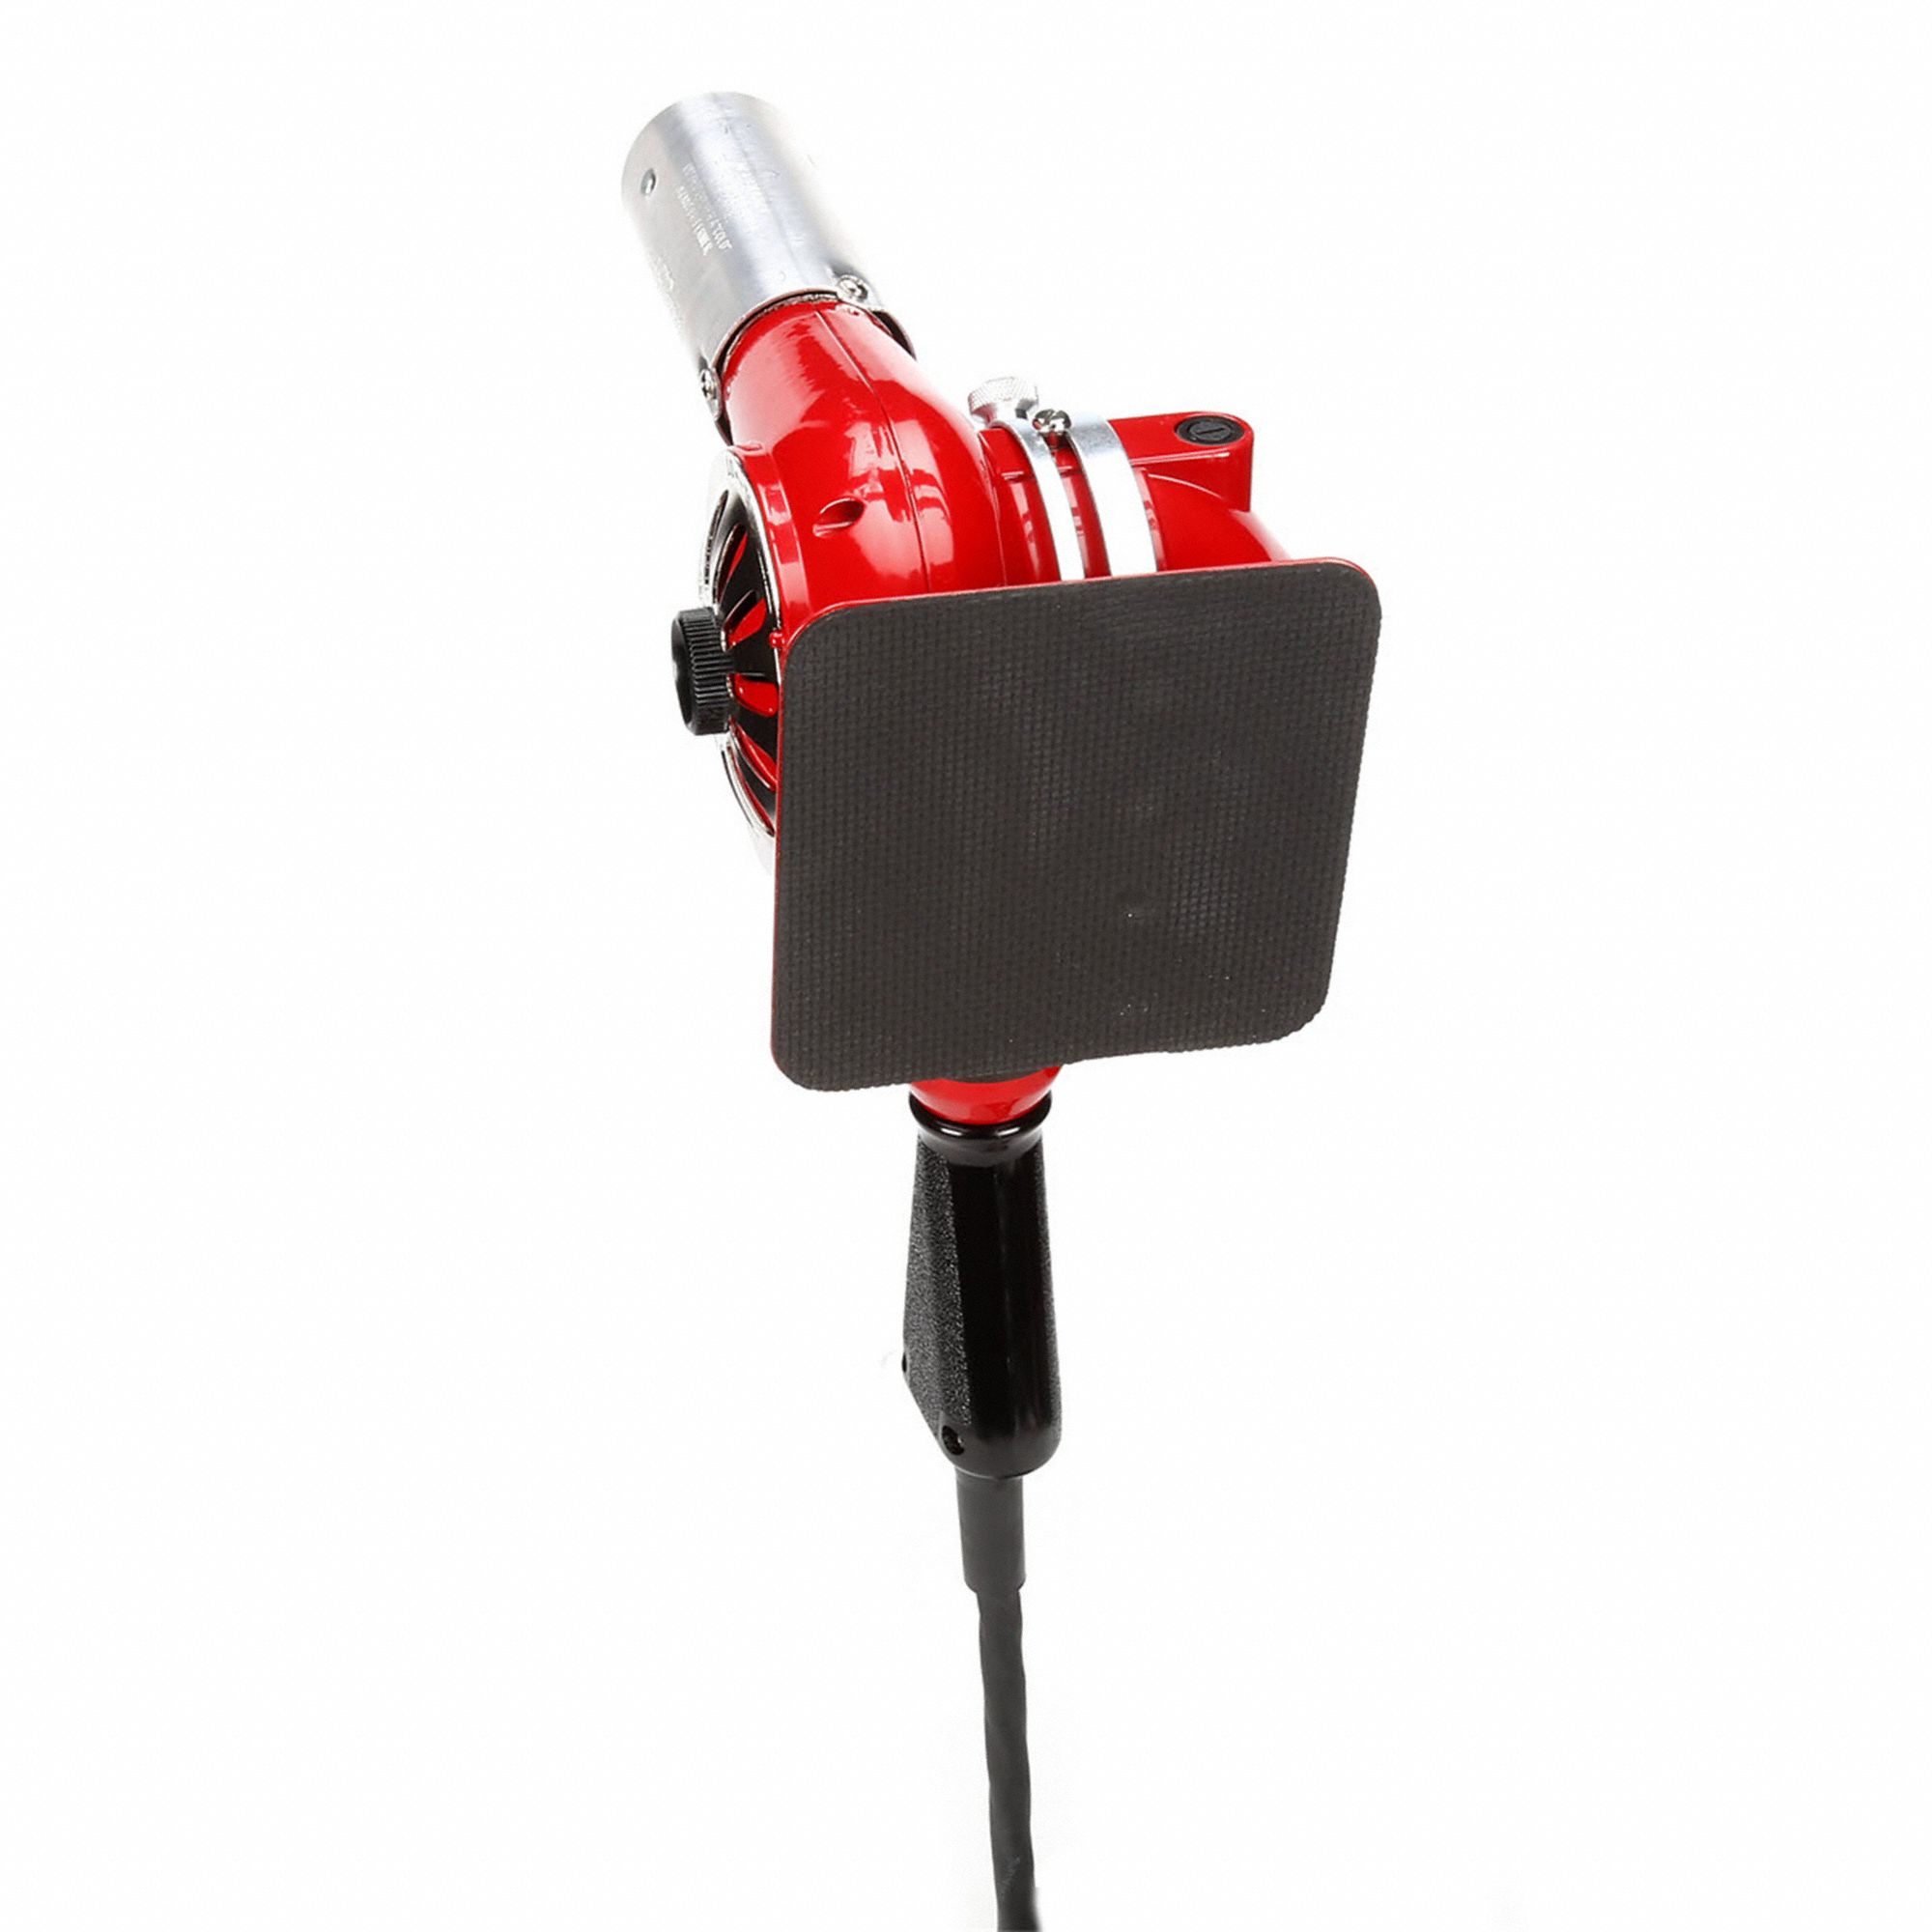 Master Appliance VT-751D Variable Temperature Heat Gun 100° to 1200°F, 1740  Watts, 120 V, 60 Hz from Cole-Parmer